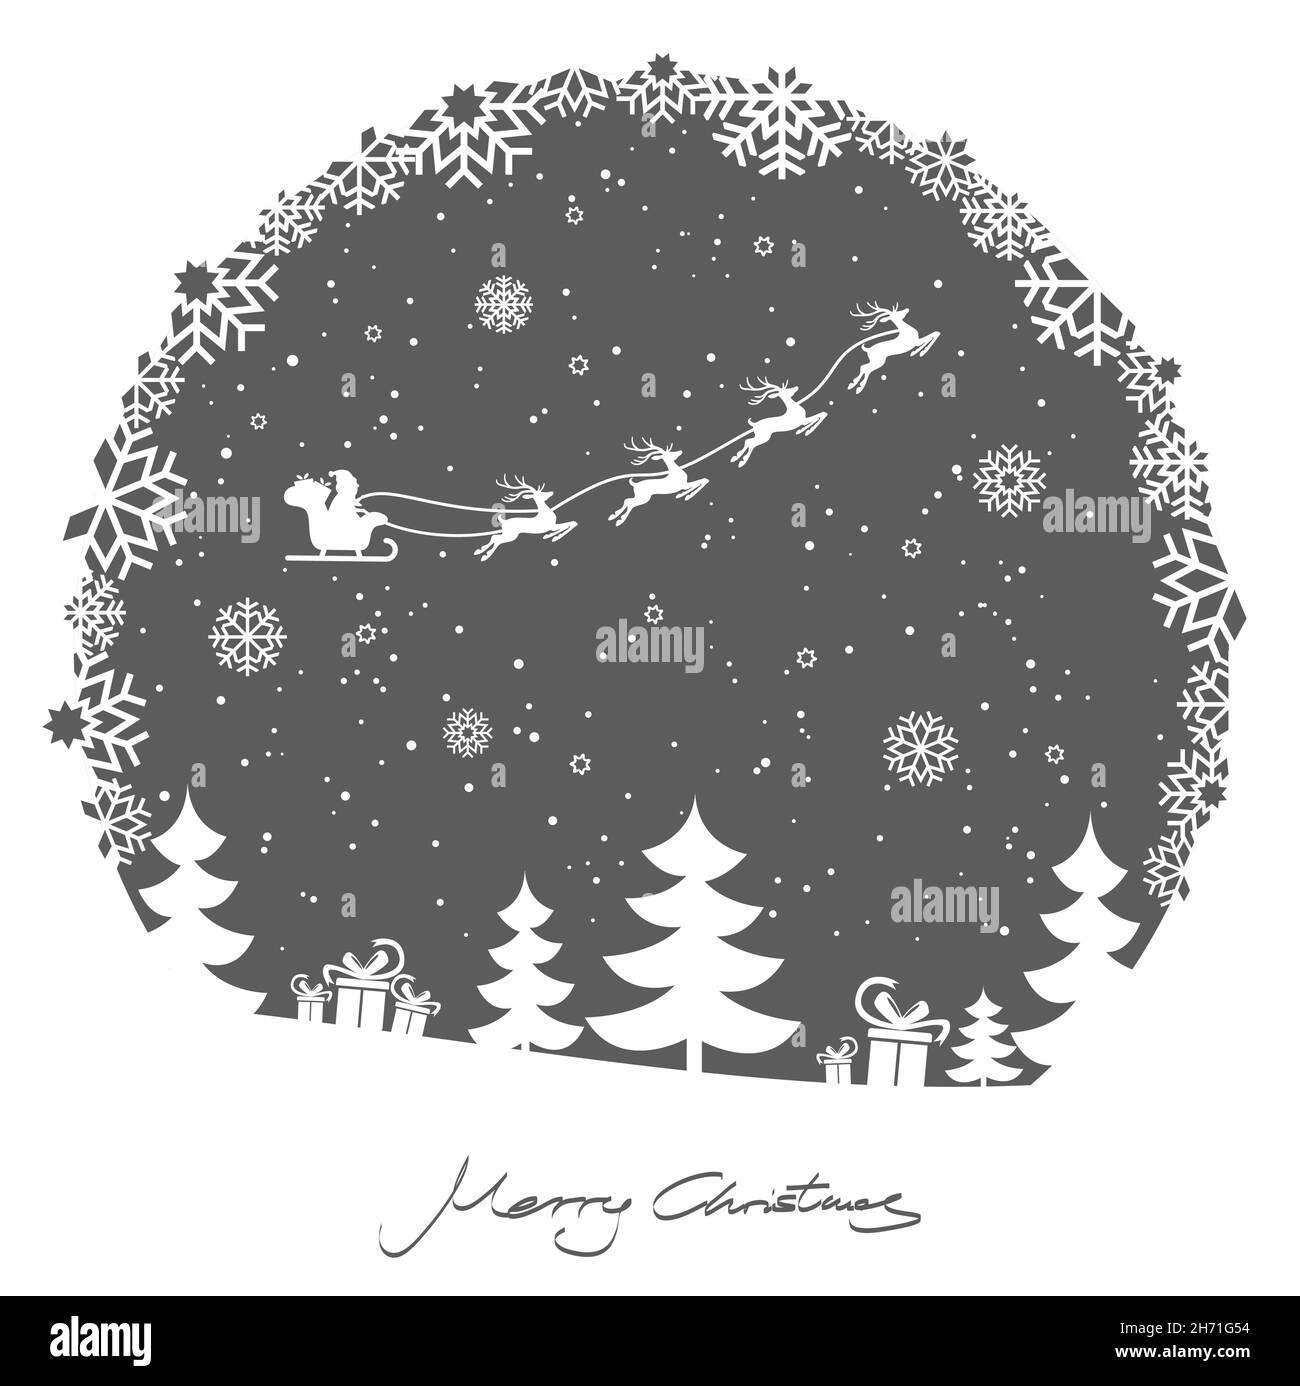 EPS 10 vector file showing round snow flake window christmastime background with typical xmas elements, fall of snow and colored background with flyin Stock Vector